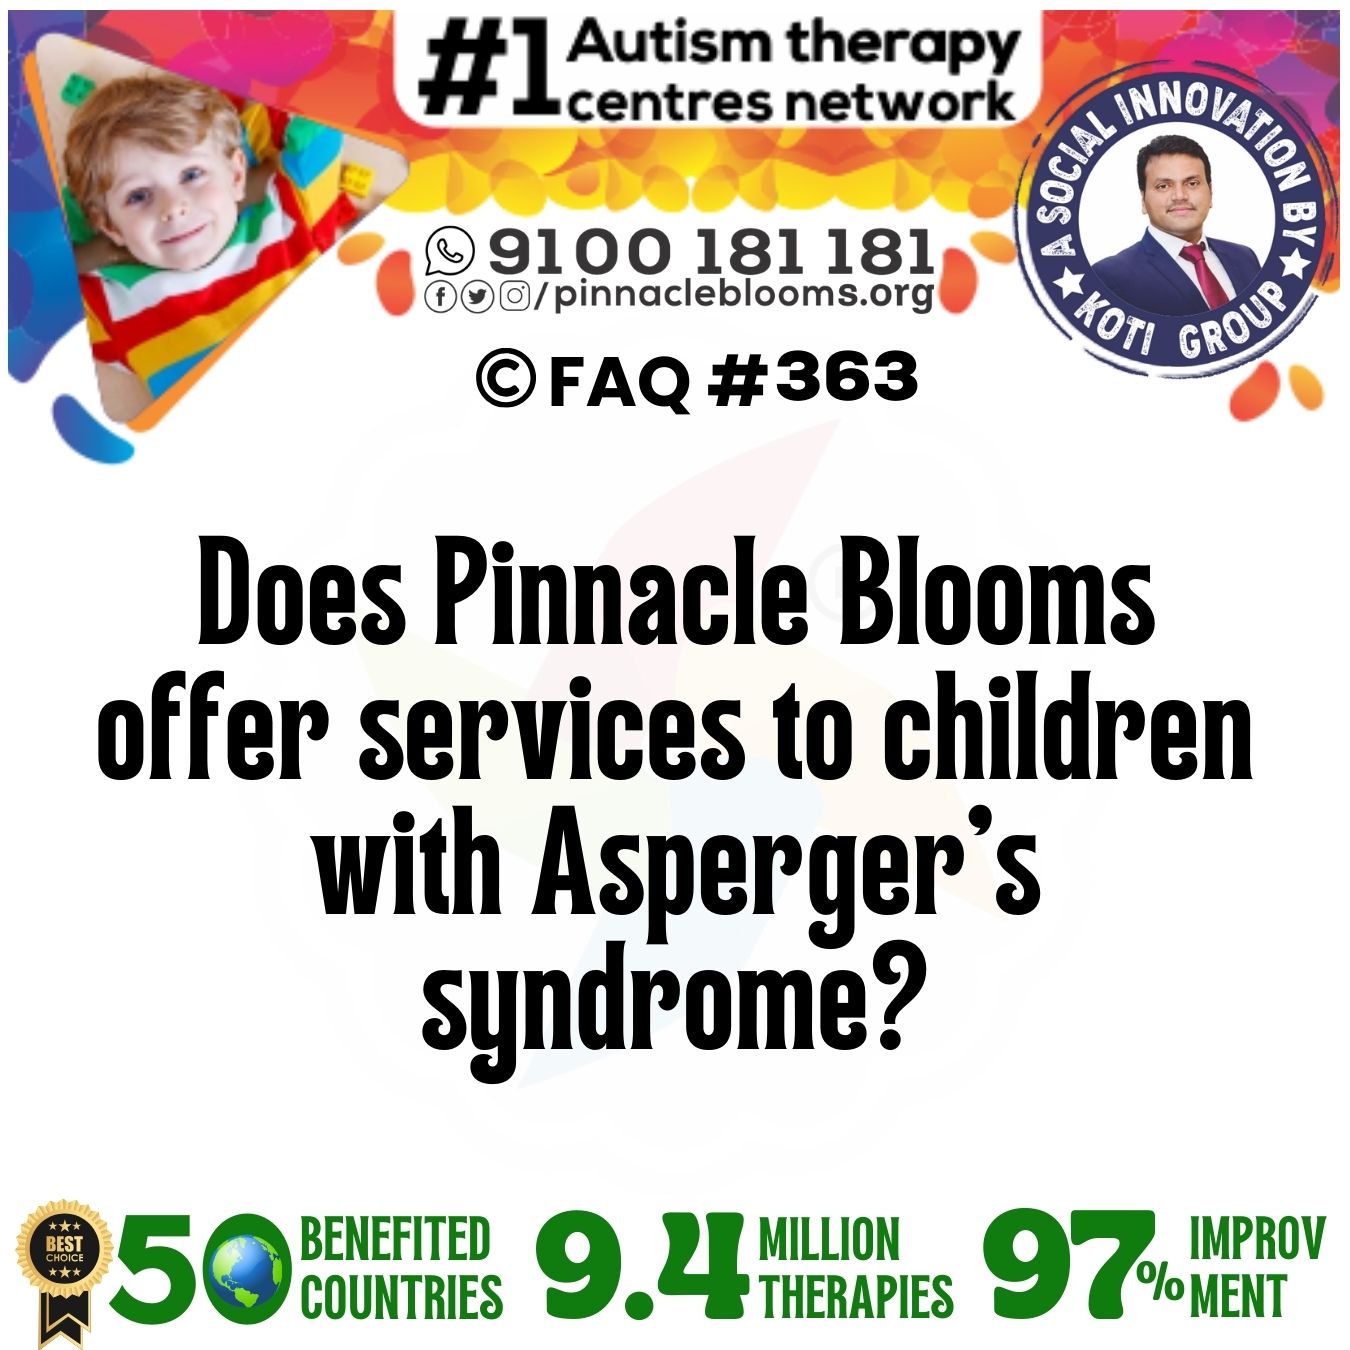 Does Pinnacle Blooms offer services to children with Asperger’s syndrome?